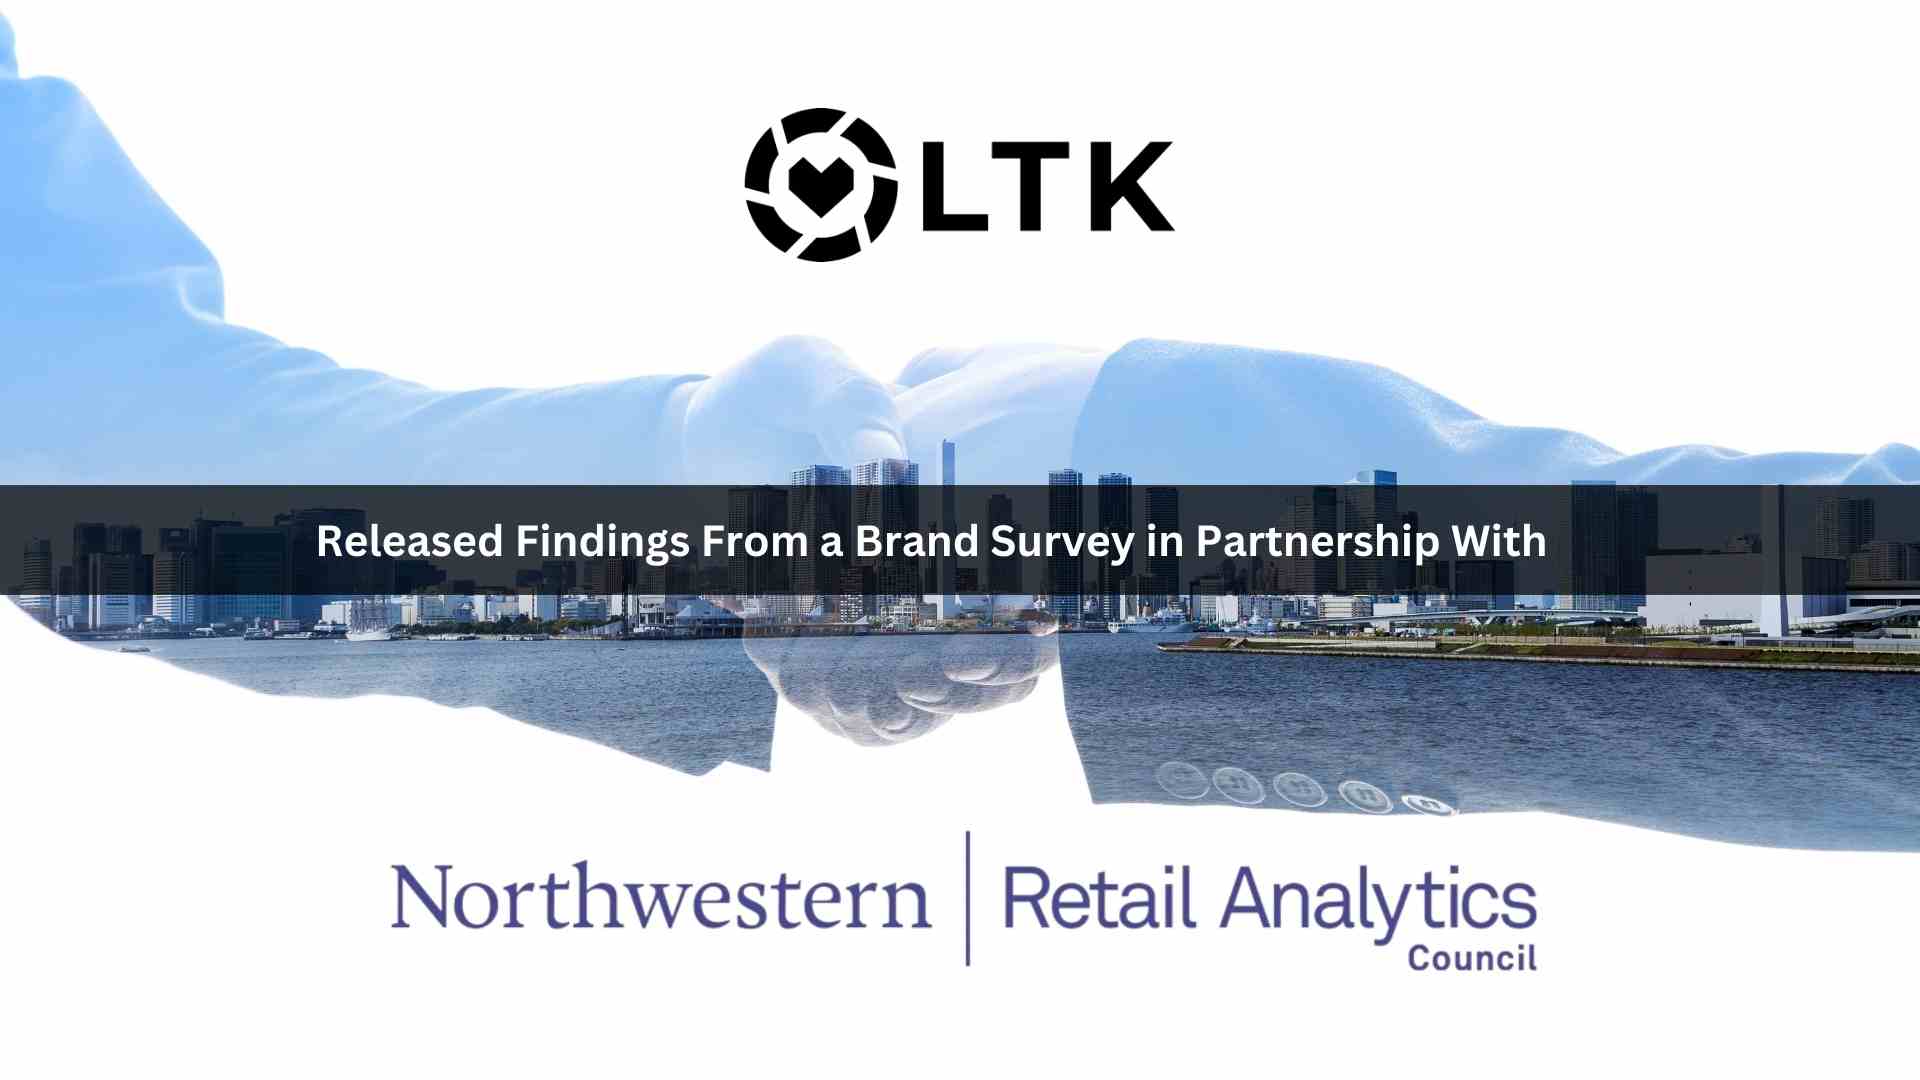 The Next Wave of Creator Marketing: New Study from LTK and Northwestern University Retail Analytics Council